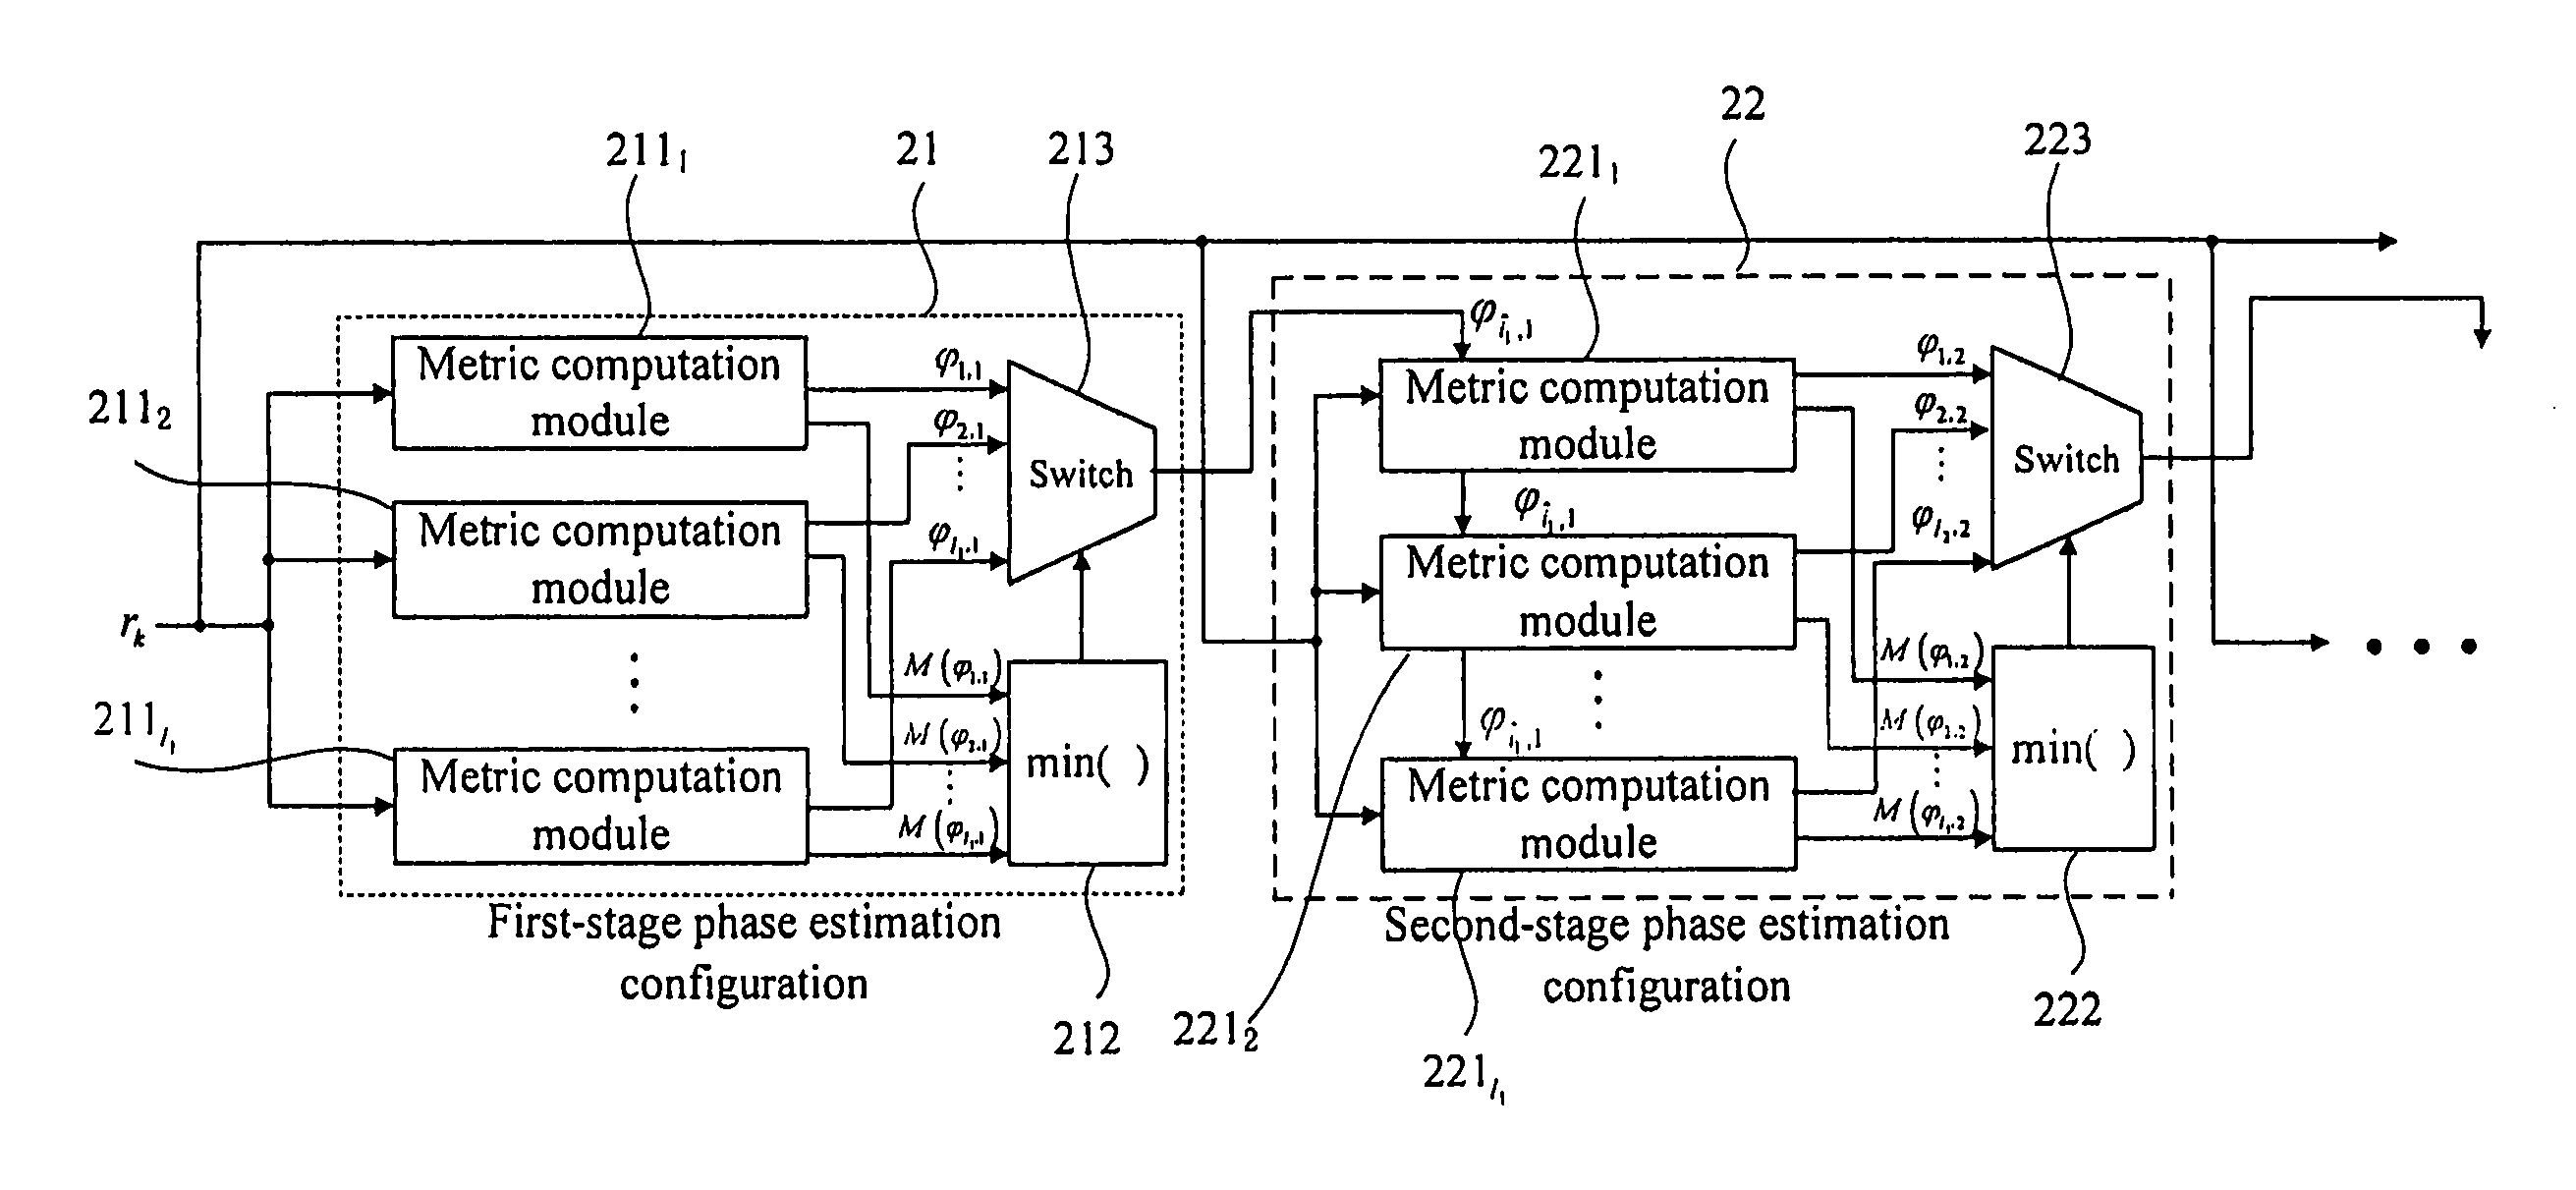 Multi-stage phase estimation method and apparatus